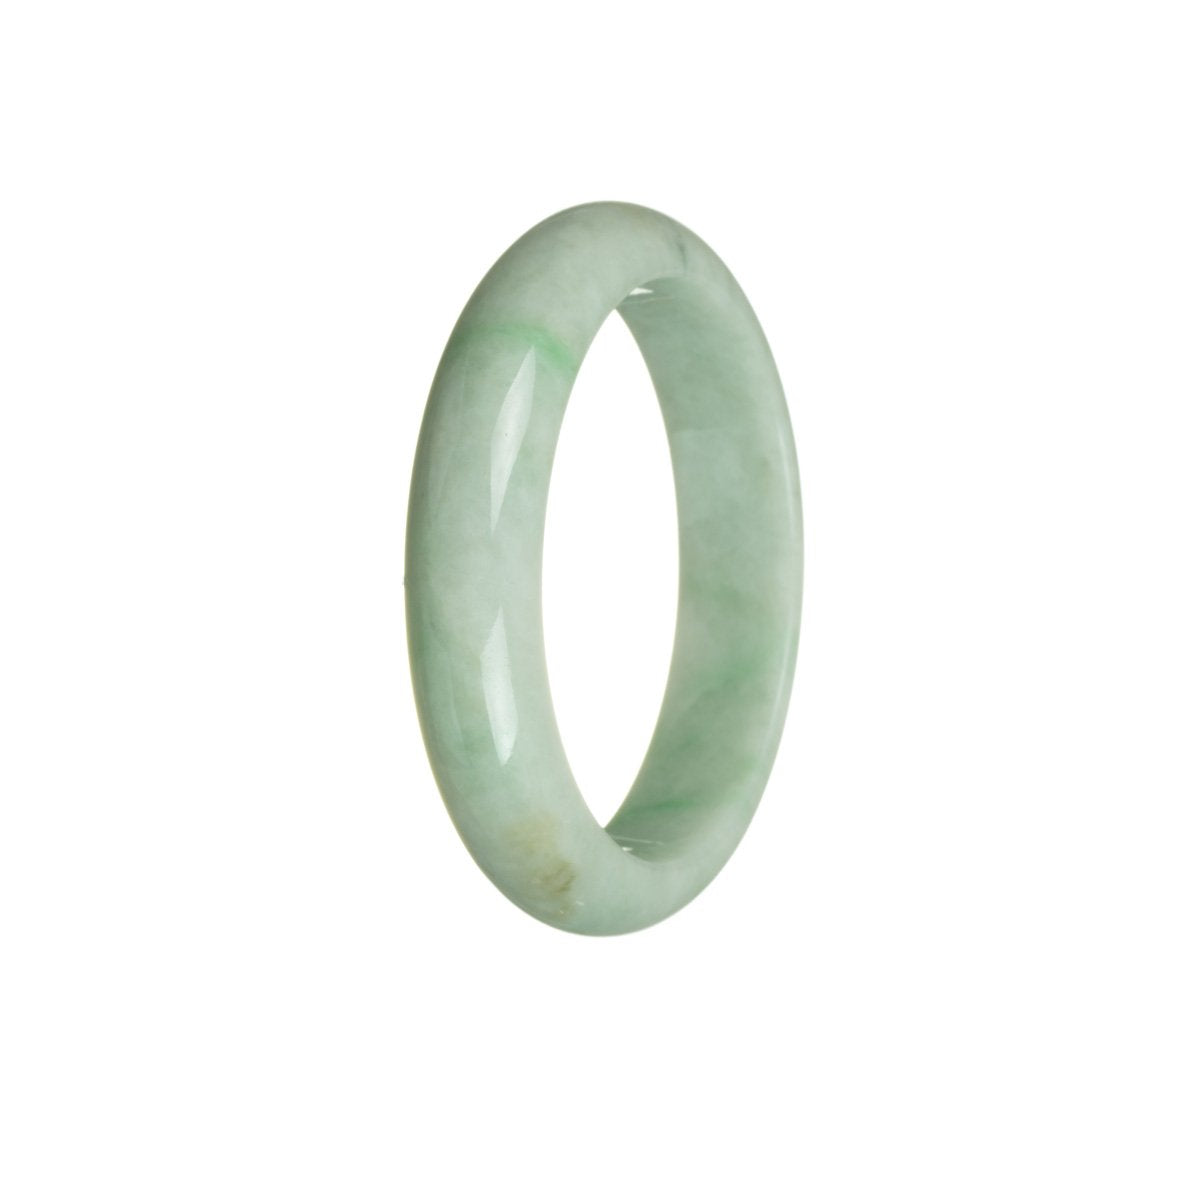 A close-up photo of a half-moon-shaped bangle bracelet made of genuine untreated green jadeite. The bracelet has a smooth and polished surface, showcasing the natural beauty of the jadeite. The vibrant green color of the stone is highlighted against the light, capturing attention and adding a touch of elegance to any outfit. The bracelet measures 53mm in diameter, making it a perfect fit for those with smaller wrists. A high-quality piece of jewelry that exudes both sophistication and uniqueness.